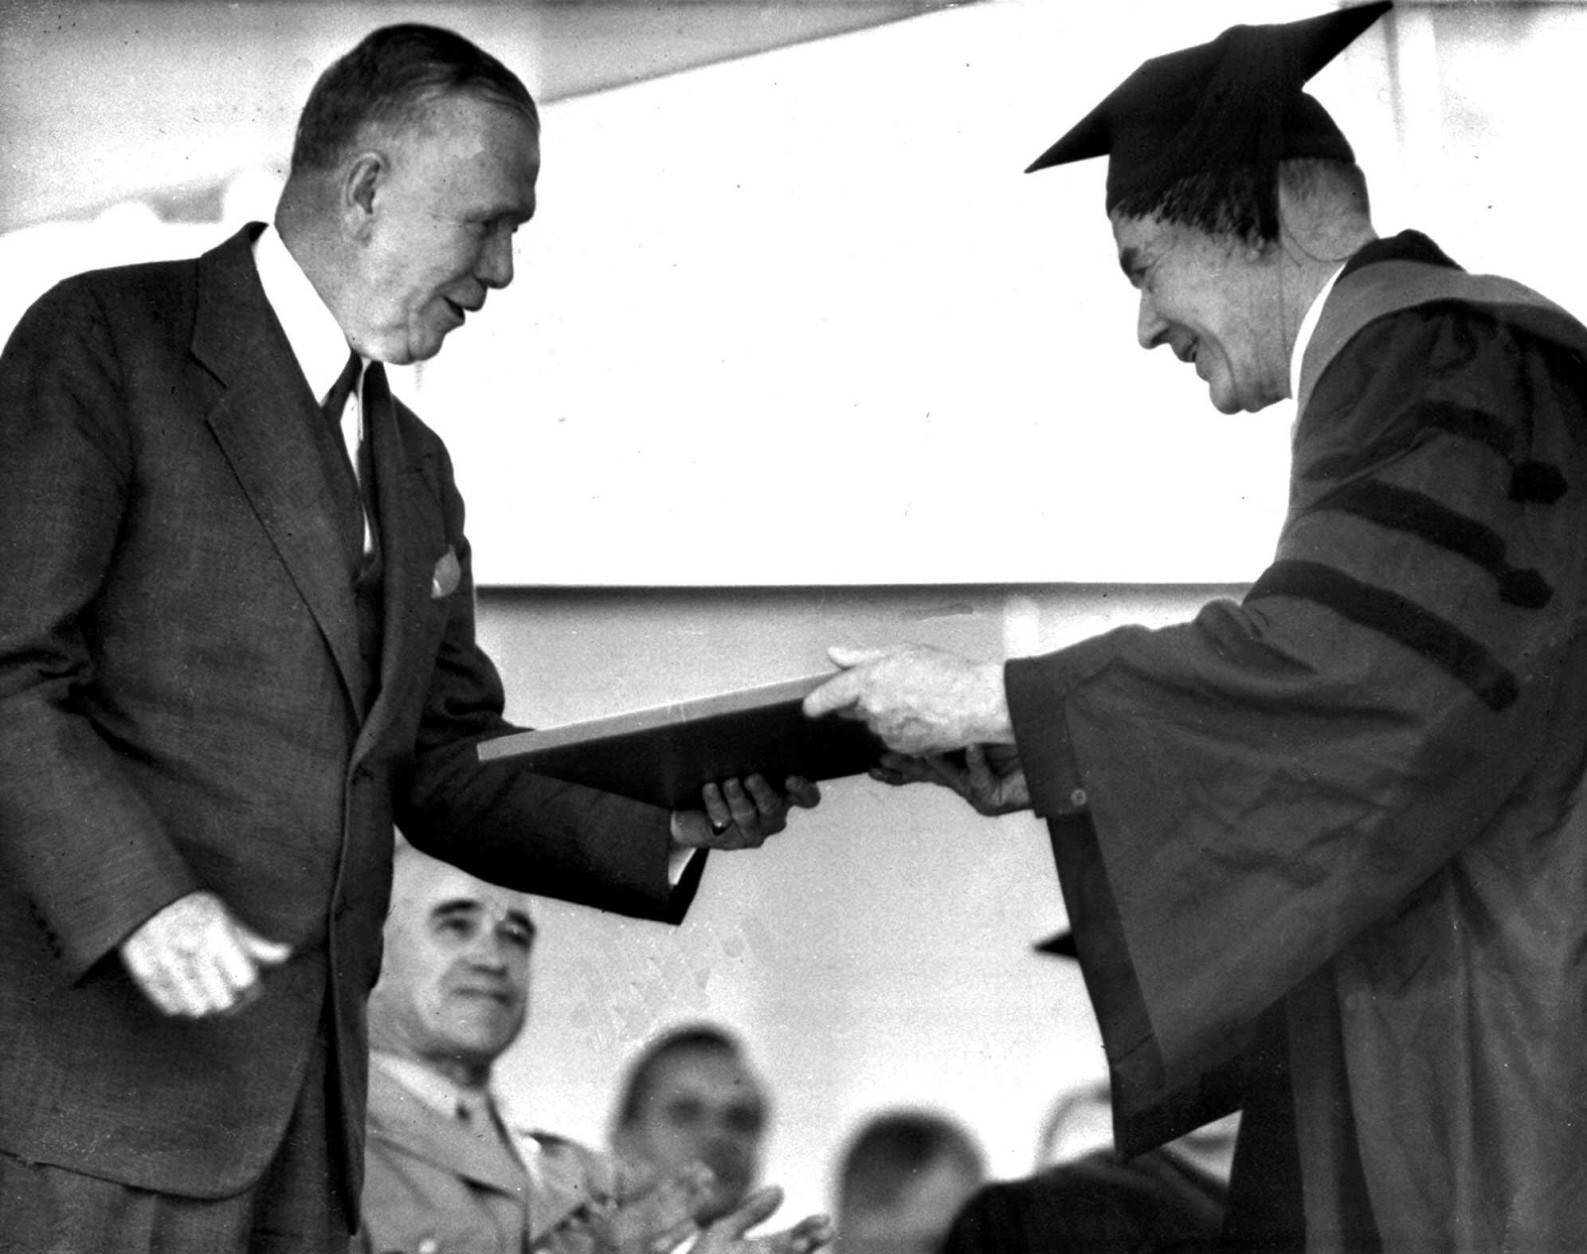 Secretary of State George C. Marshall, left, receives an honorary degree of Doctor of Laws June 5,1947 from Dr. Reginal Fitz, Harvard University marshal.  Presentation to the former Army Chief of Staff took place at university commencement ceremonies at Cambridge, Mass. Gen. Omar N. Bradley, veterans admnistrator, also a degree receipient, is in background next to Marshall. (AP Photo)